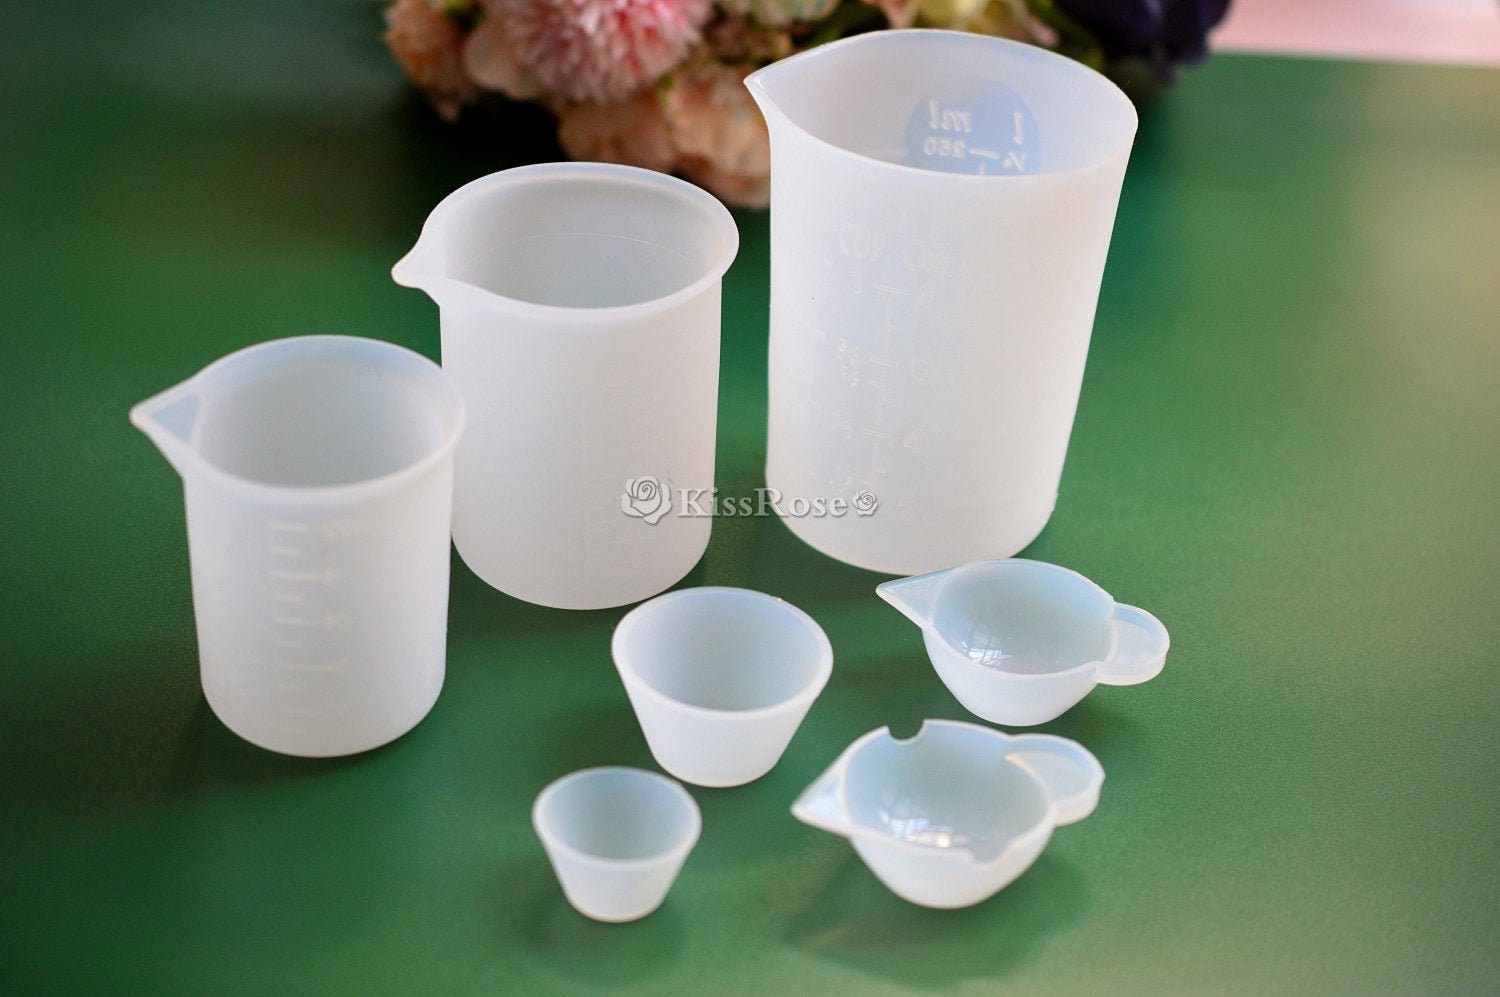 60ml Plastic Measuring Cup Set of 10, Reusable Dispensing Cup, Tools for UV  Resin, Epoxy Resin Jewelry Making Supplies 